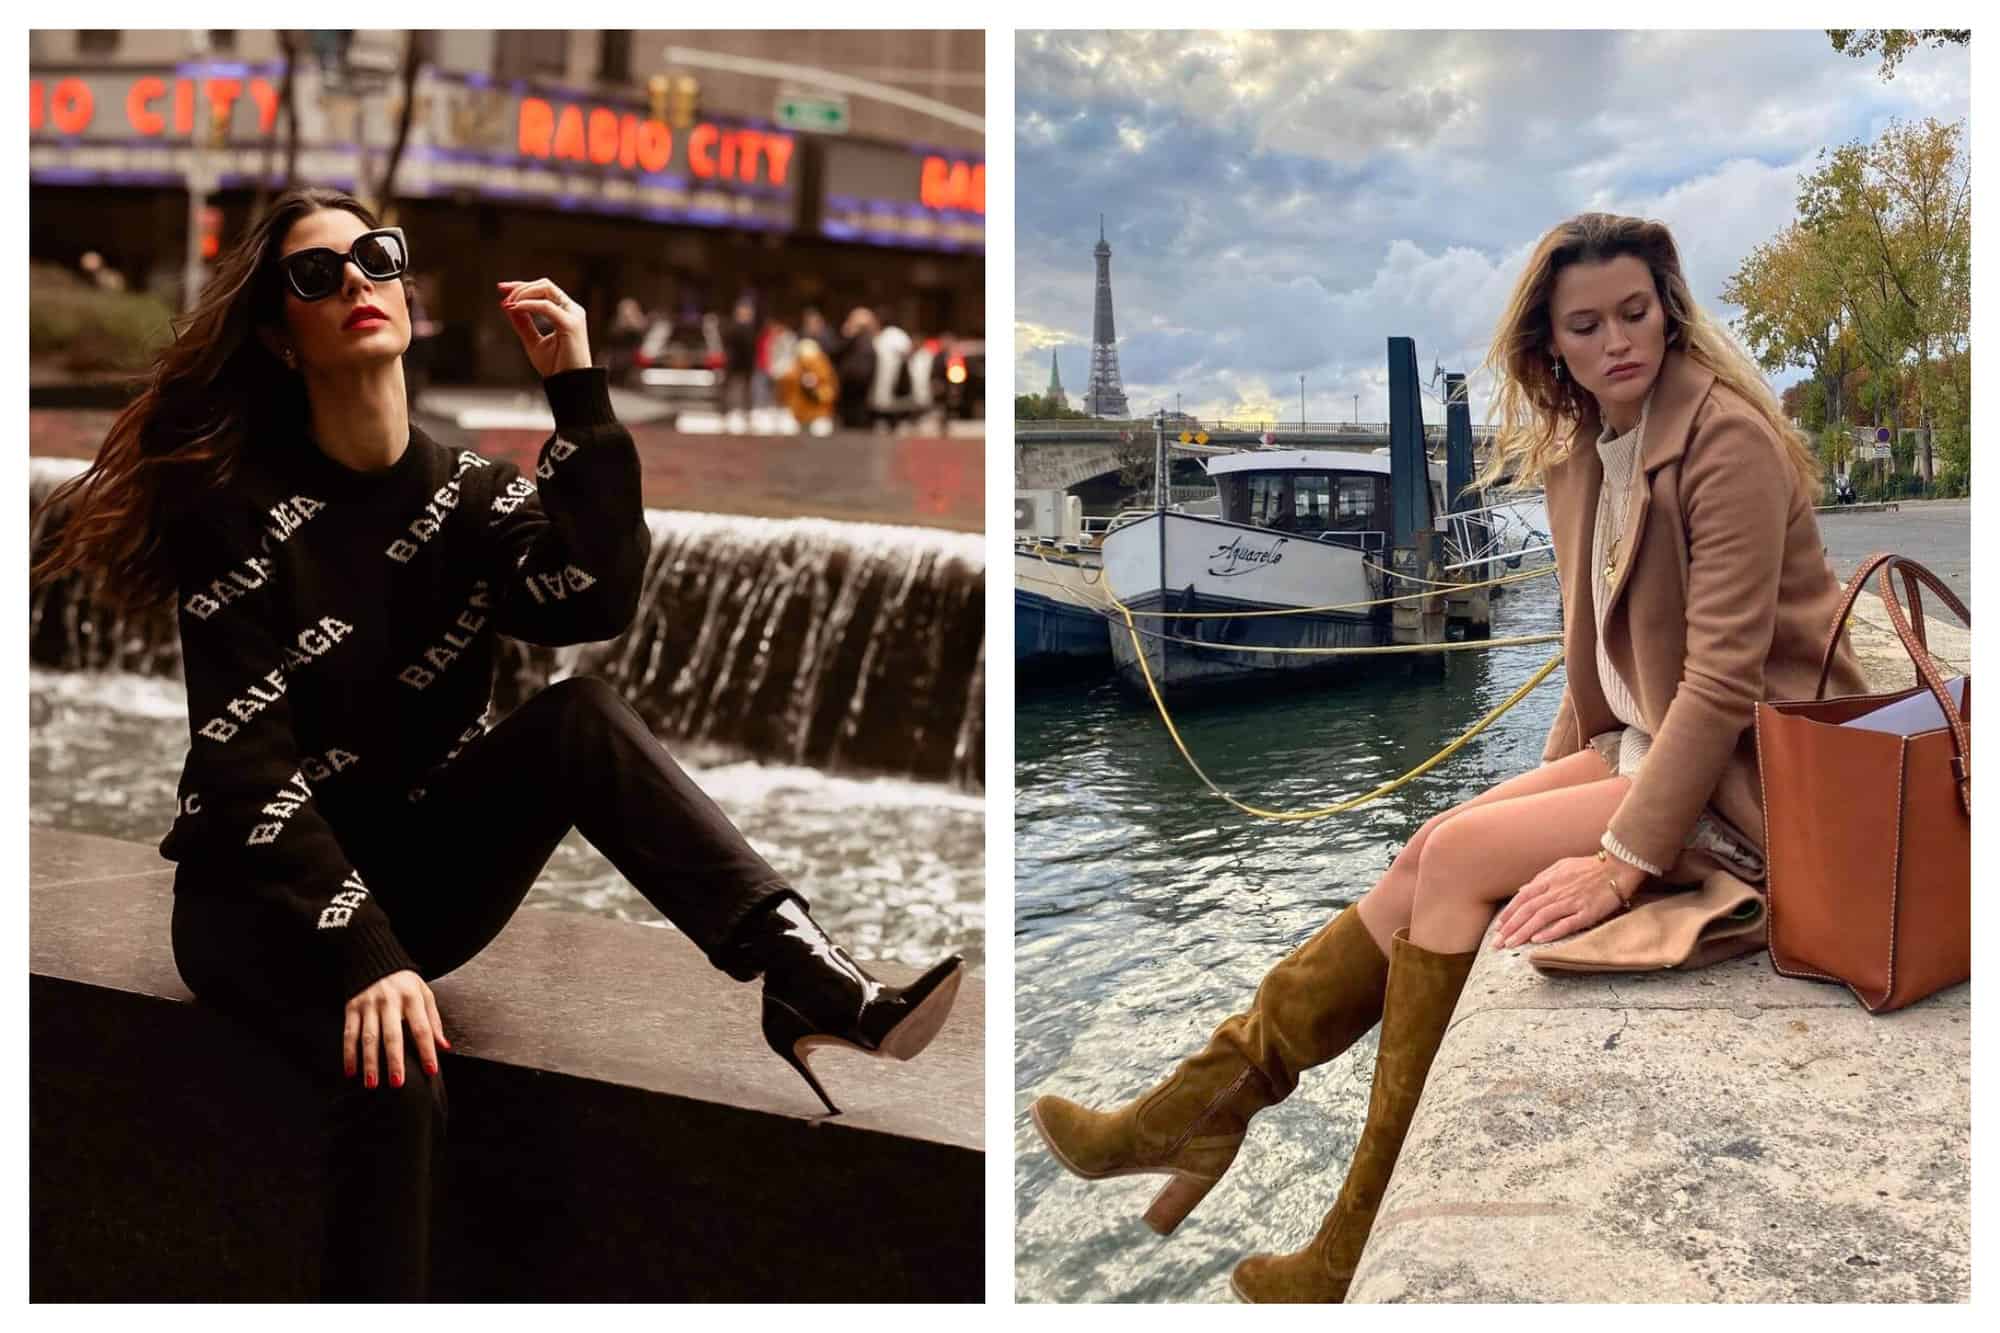 Left: Fashion blogger Marion is sitting in the Avenue of the Americas fountain located in 1251 Sixth Avenue in Manhattan. Behind her is the famous Radio City. She is casually sitting, wearing a pair of big, black sunnies, a Balenciaga pull, black slim pants, shiny black stiletto ankle boots. The heels of these boots are probably 3 inches tall and are very pointy. Right: Fashion blogger Chloe Lecareux is sitting by the Seine River in Paris. Behind her are two boats parked, a parisian bridge, and the Eiffel Tower. She is wearing a tan coat, off-white knitted pull, a tan mini-skirt, suede golden brown boots that go just right below her knees. She is looking at her brown colored tote bag that is placed on her left.